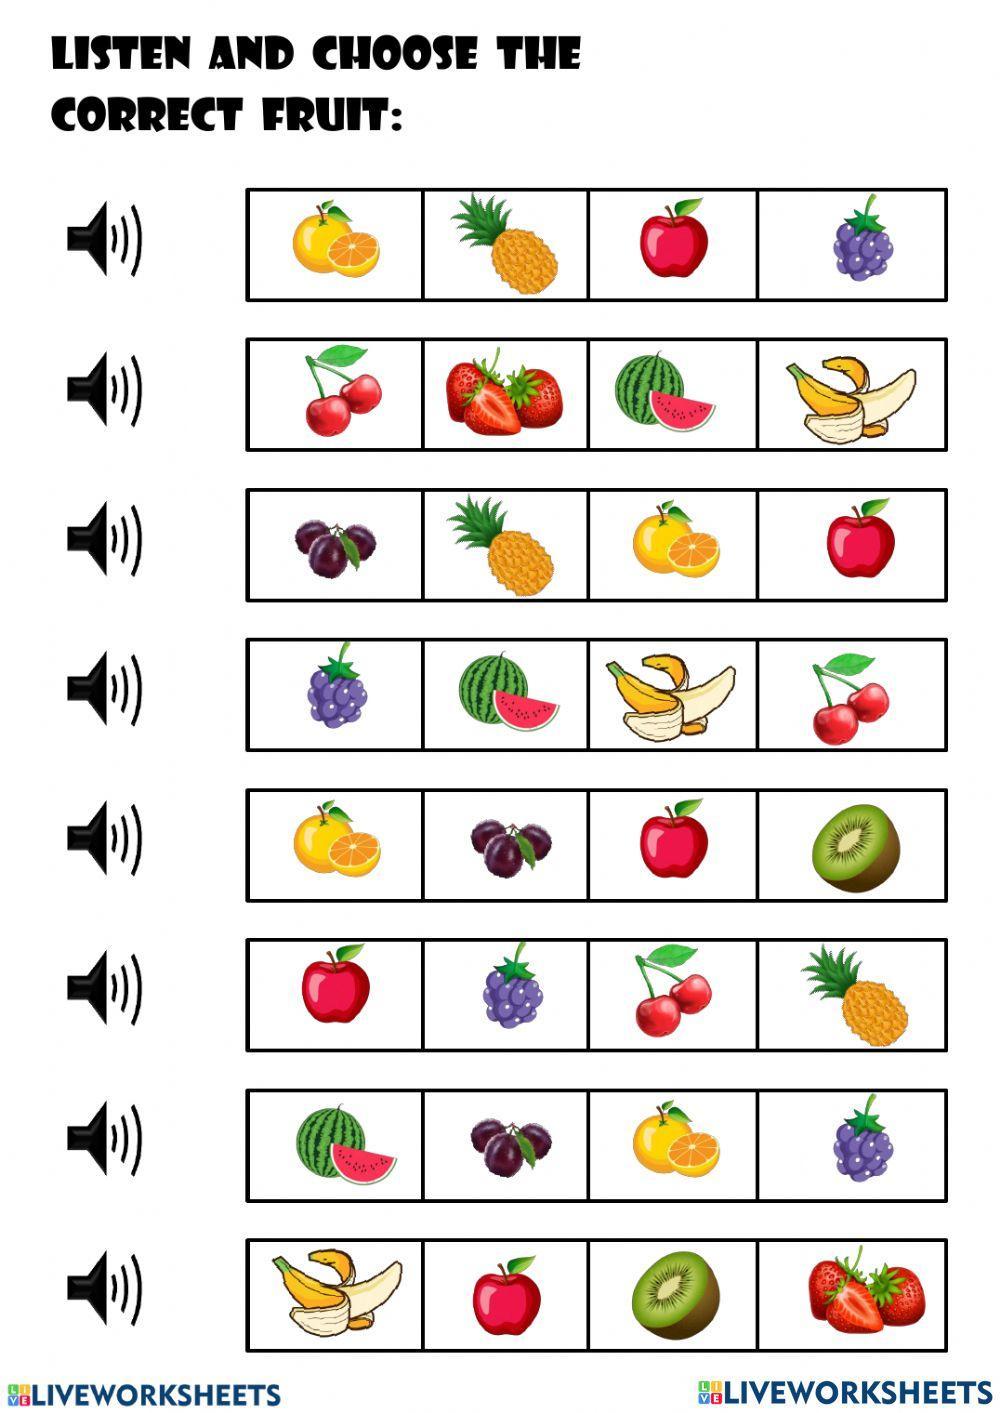 Fruits listen and select